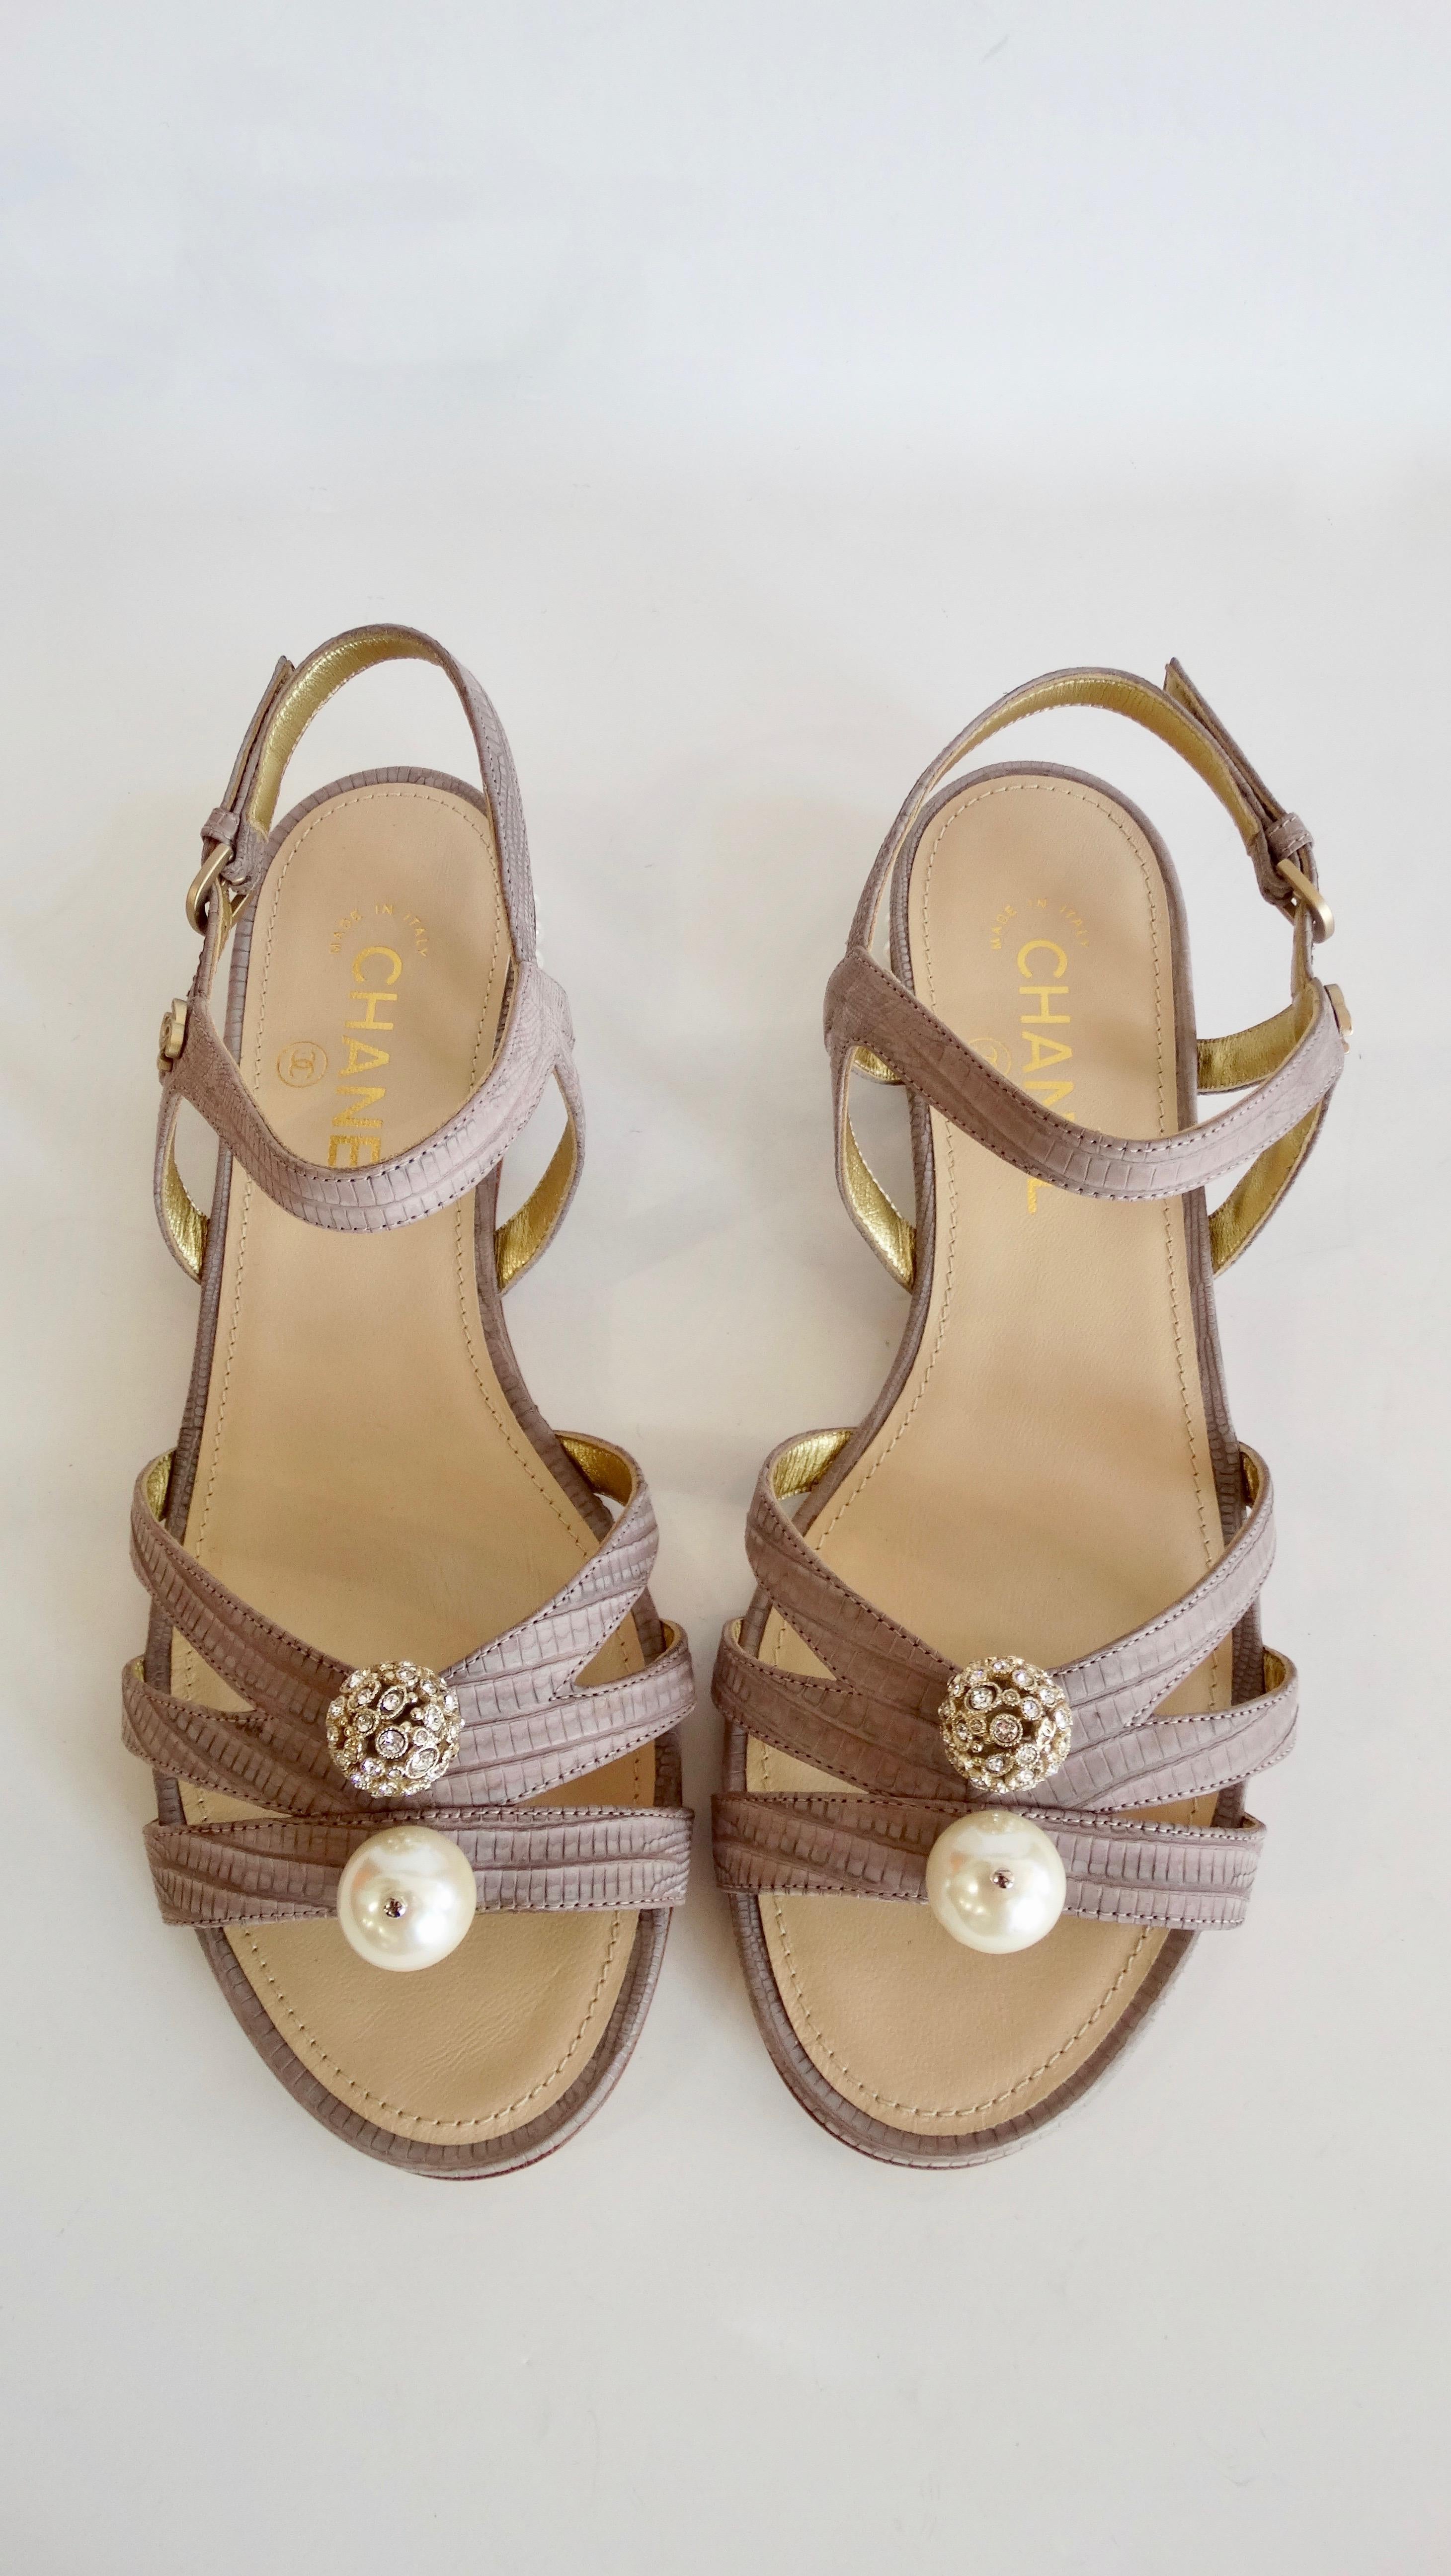 Complete your shoe collection with these chic Chanel sandals! Circa 2015 from their Cruise collection, these strappy sandals are crafted from pastel purple dyed lizard skin and feature a faux pearl studded heel. Front of sandal is adorned with a